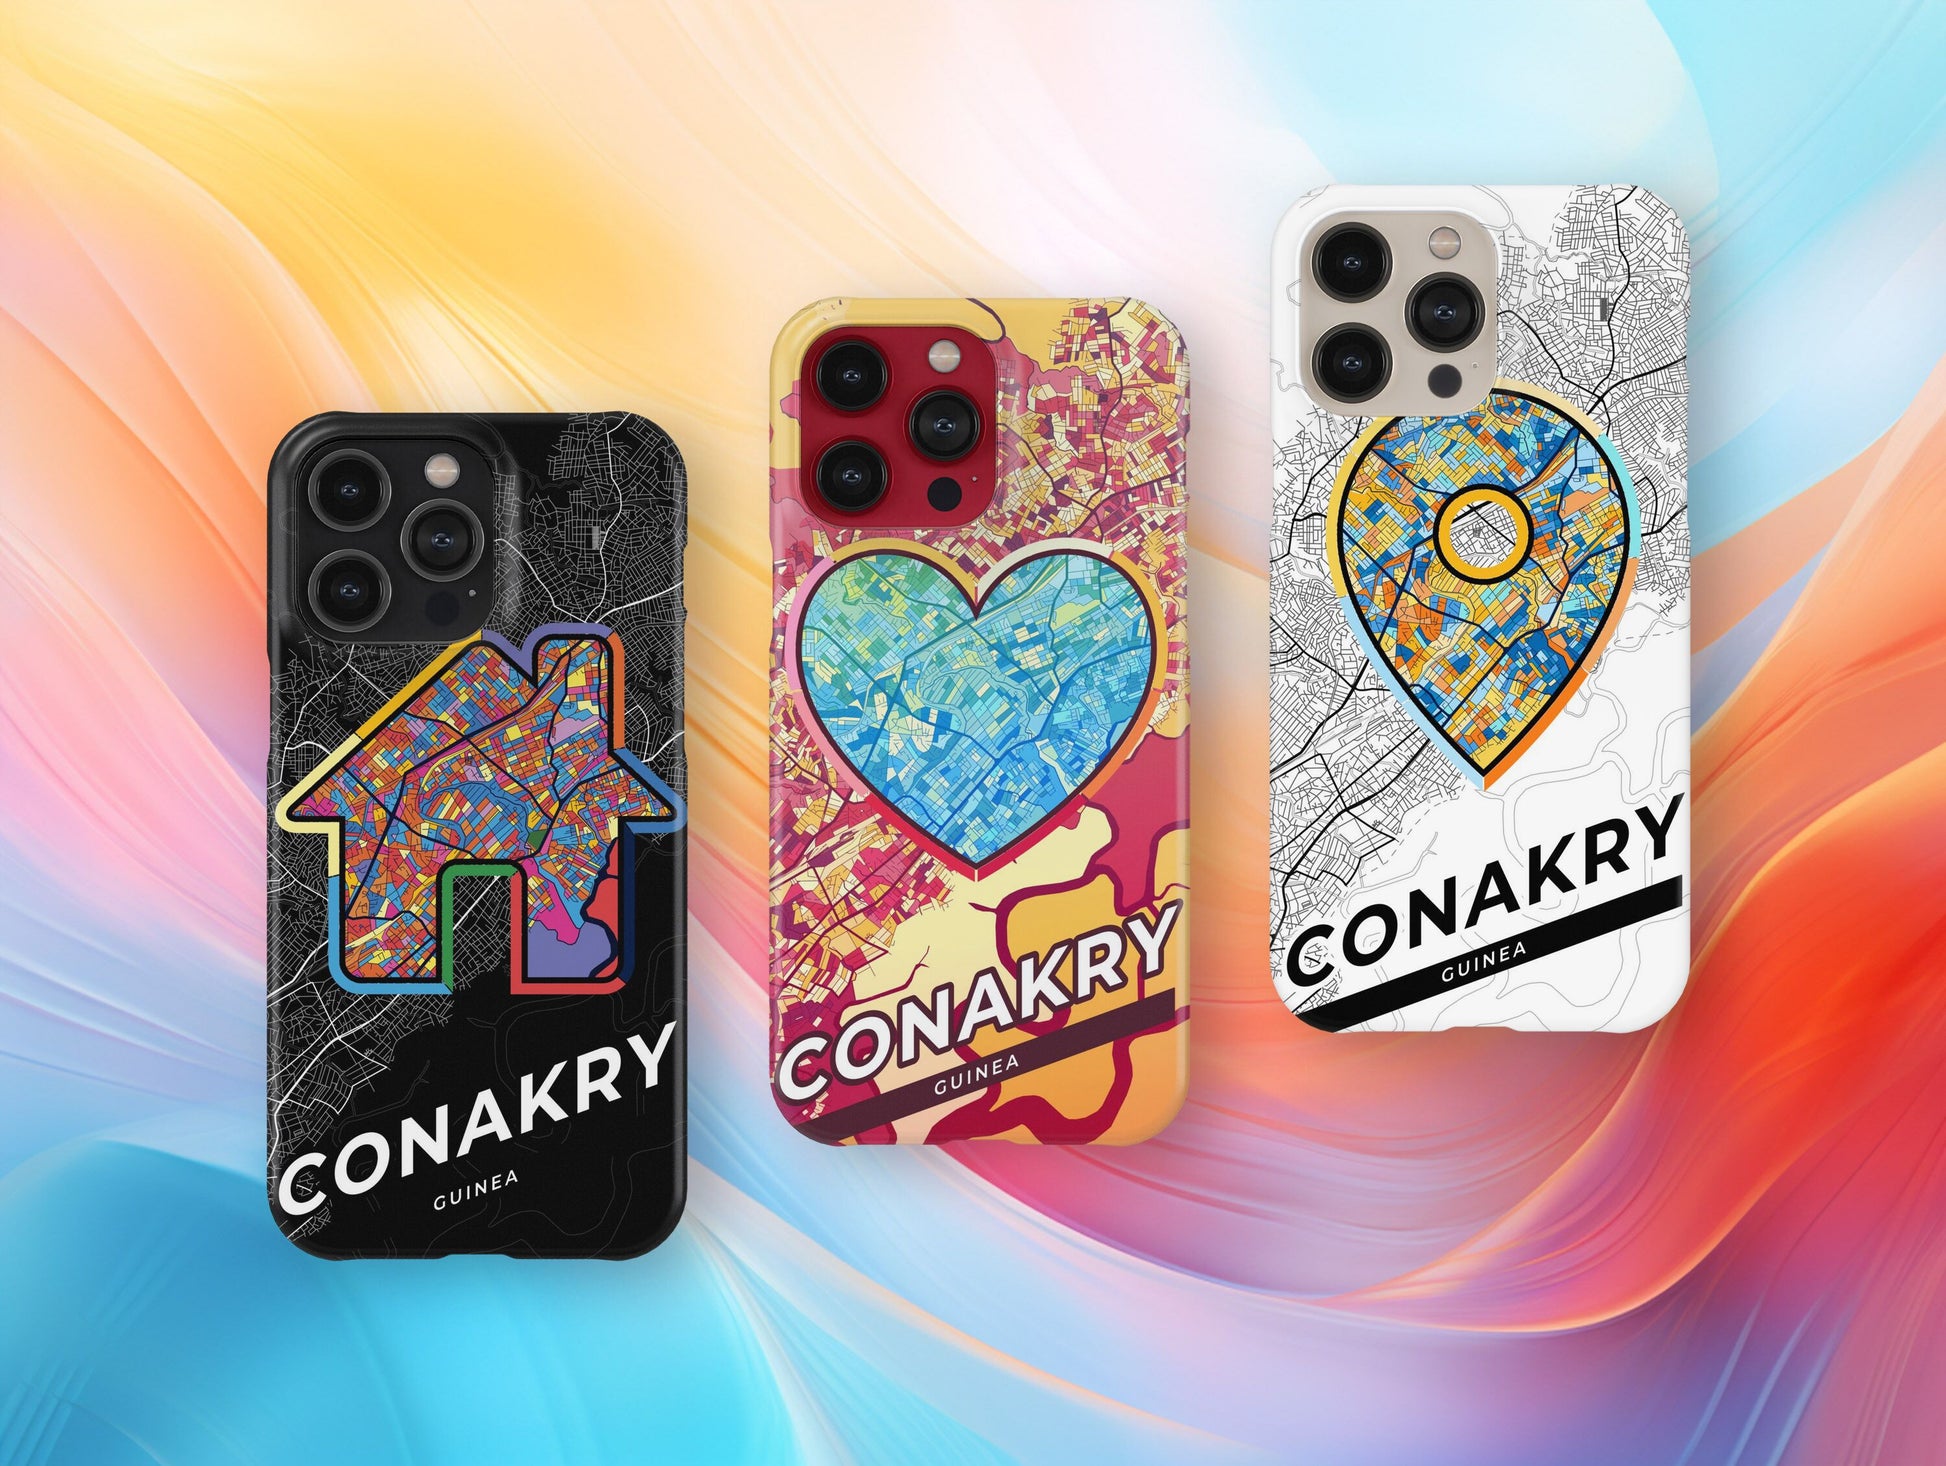 Conakry Guinea slim phone case with colorful icon. Birthday, wedding or housewarming gift. Couple match cases.